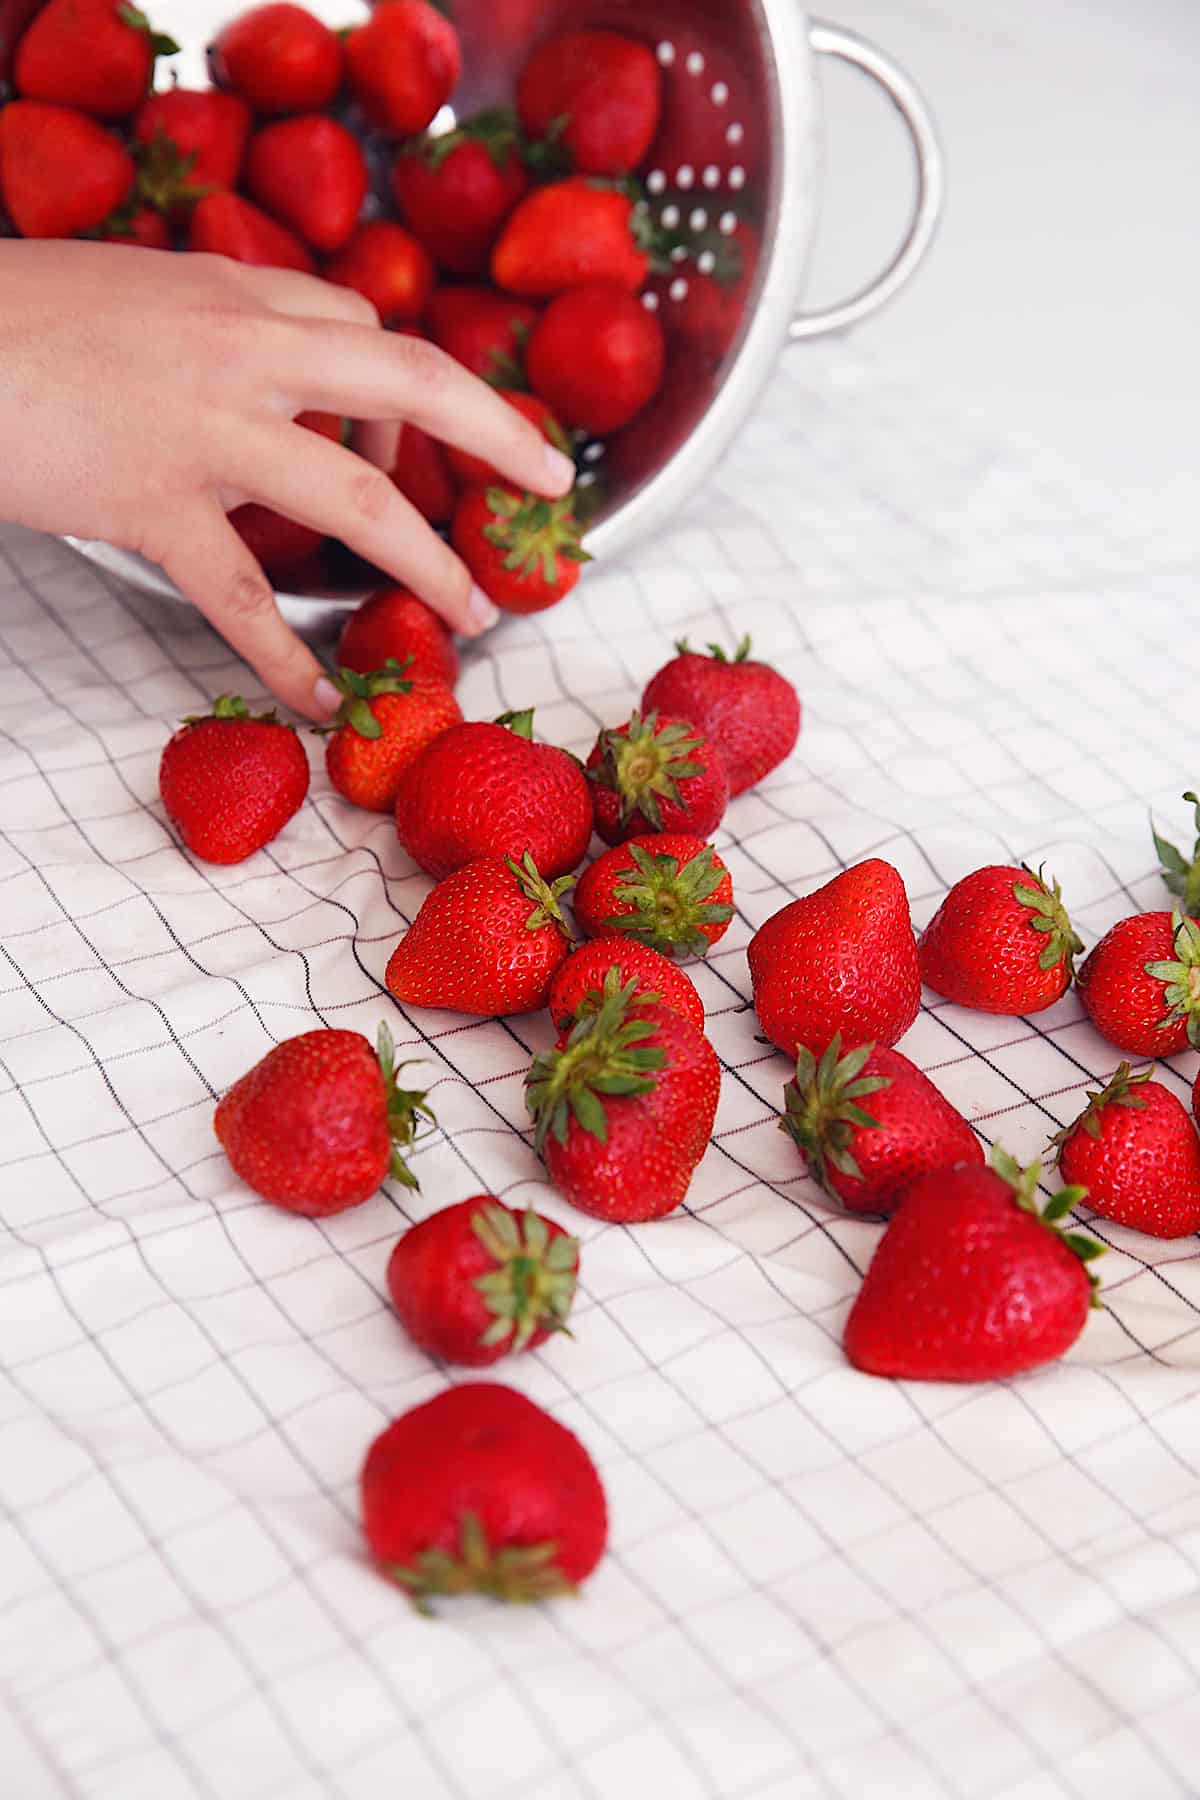 https://lexiscleankitchen.com/wp-content/uploads/2022/07/how-to-clean-strawberries8.jpg